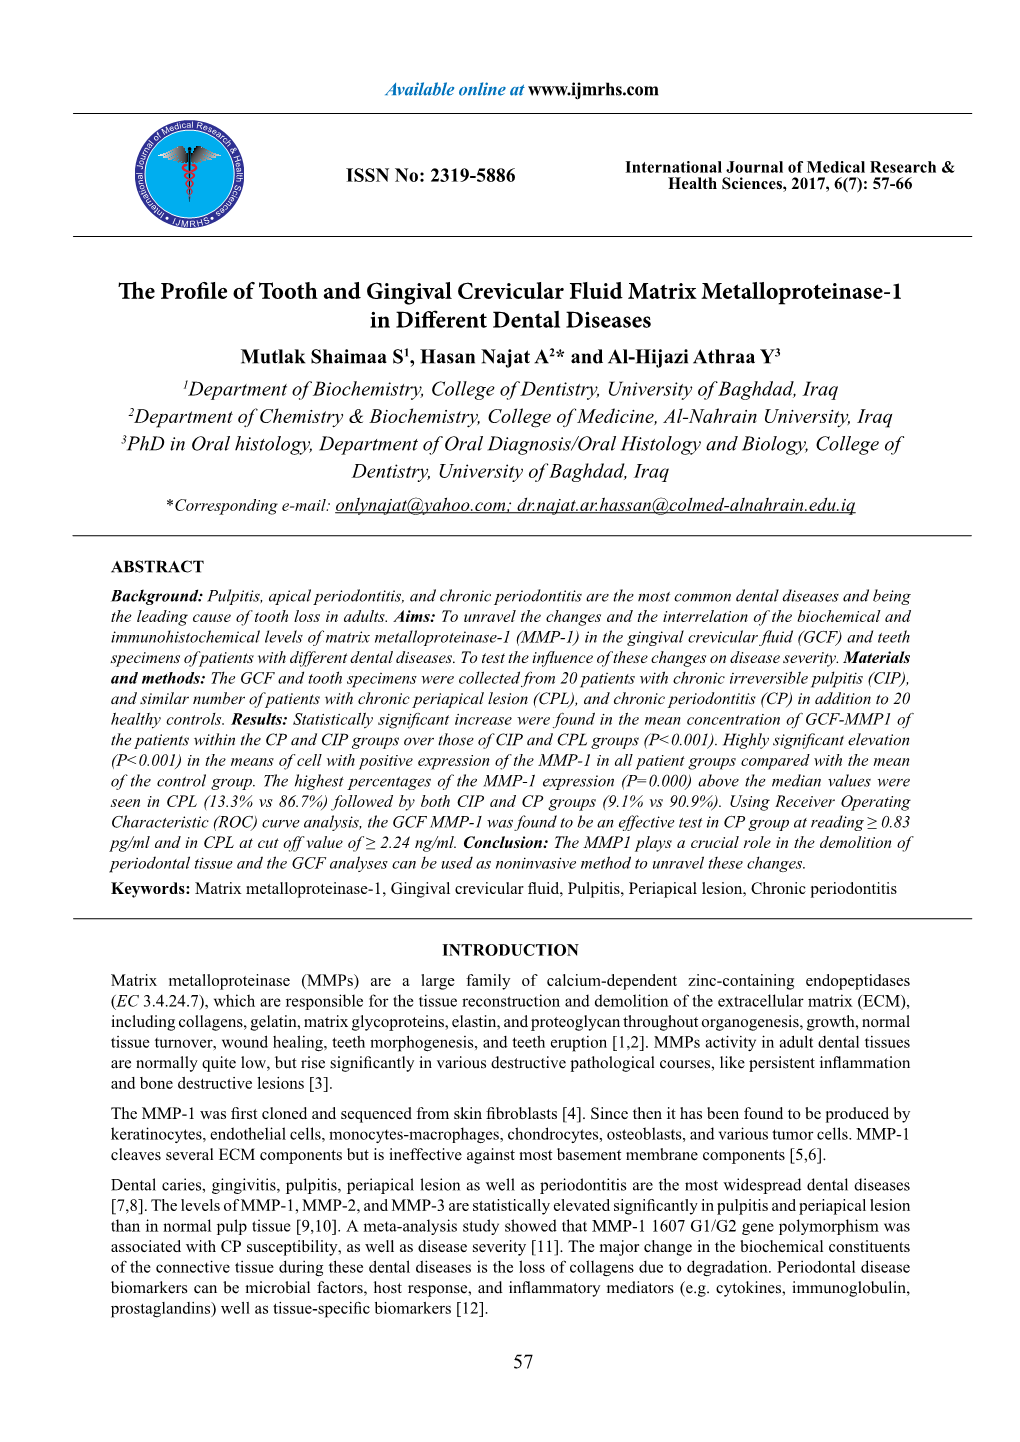 The Profile of Tooth and Gingival Crevicular Fluid Matrix